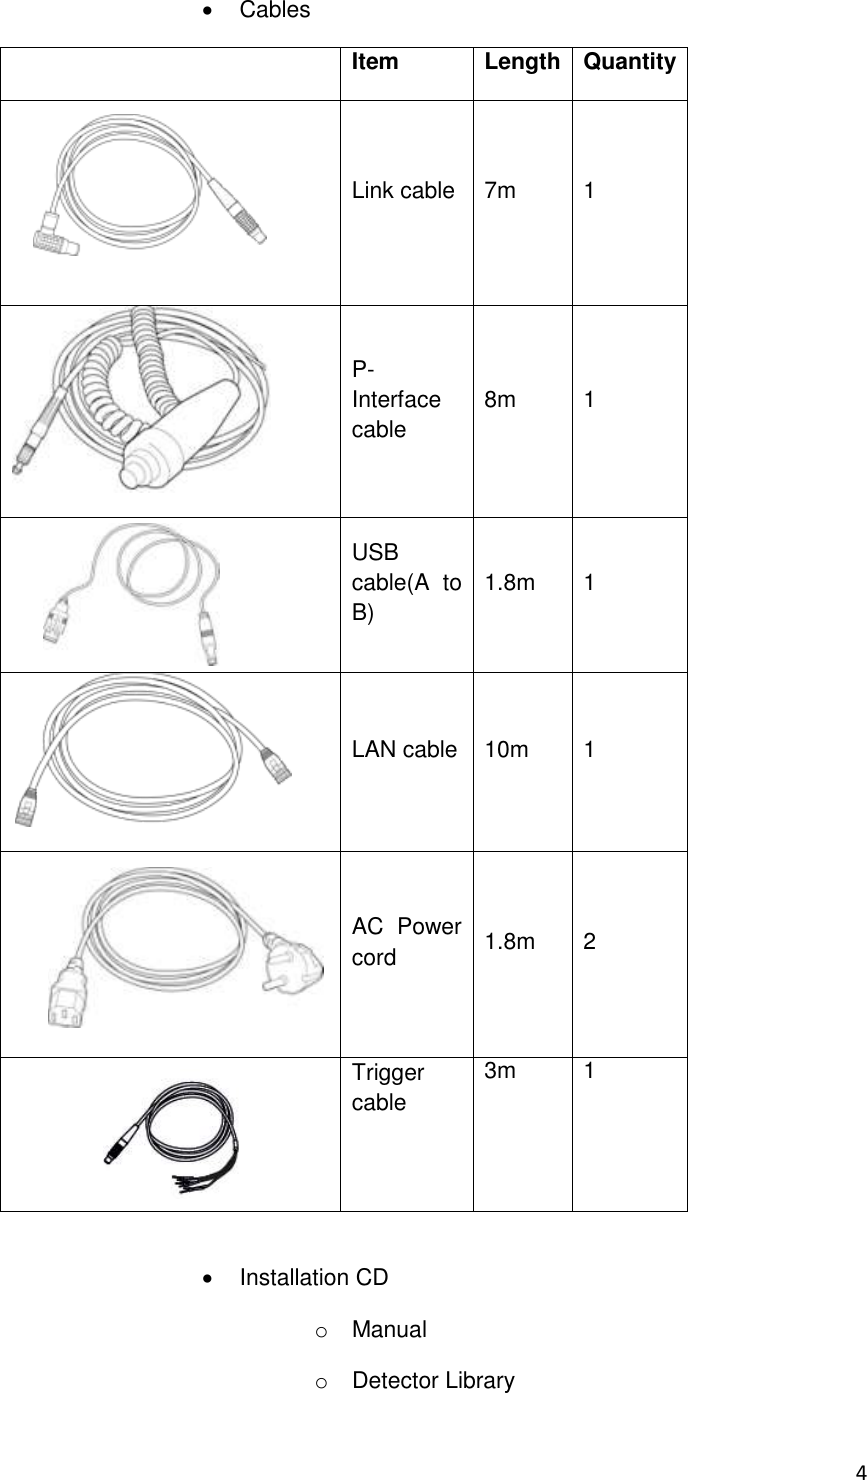 4     Cables  Item Length Quantity       Link cable 7m 1  P-Interface cable 8m 1    USB cable(A  to B) 1.8m 1  LAN cable 10m 1     AC  Power cord 1.8m 2      Trigger cable 3m 1    Installation CD o  Manual o  Detector Library 